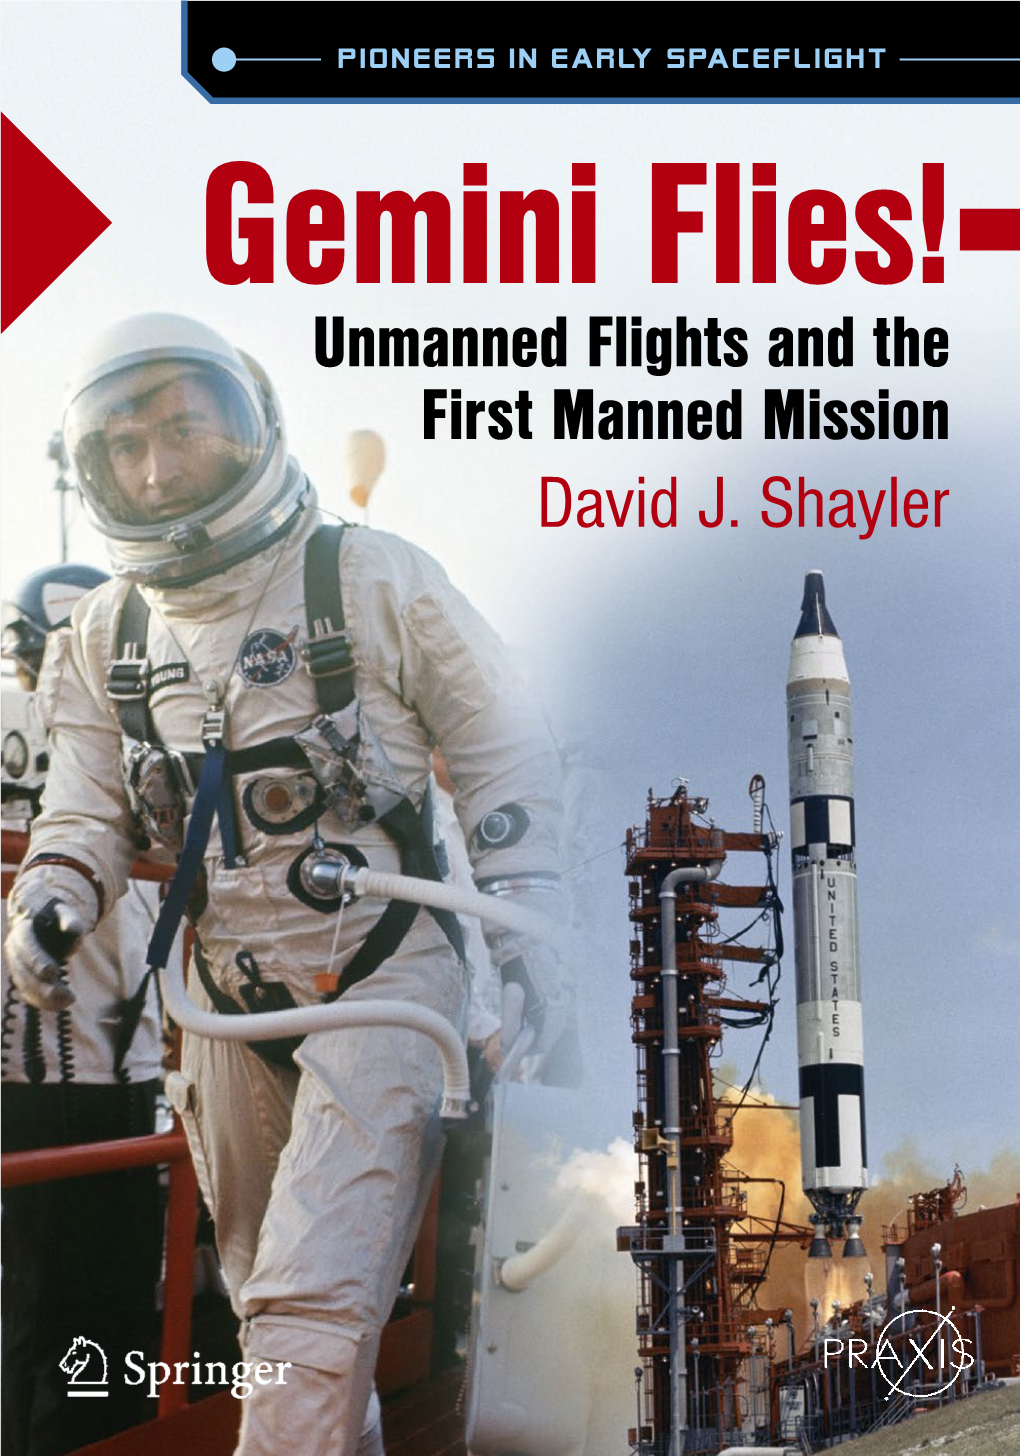 Unmanned Flights and the First Manned Mission David J. Shayler Gemini Flies! Unmanned Flights and the First Manned Mission David J